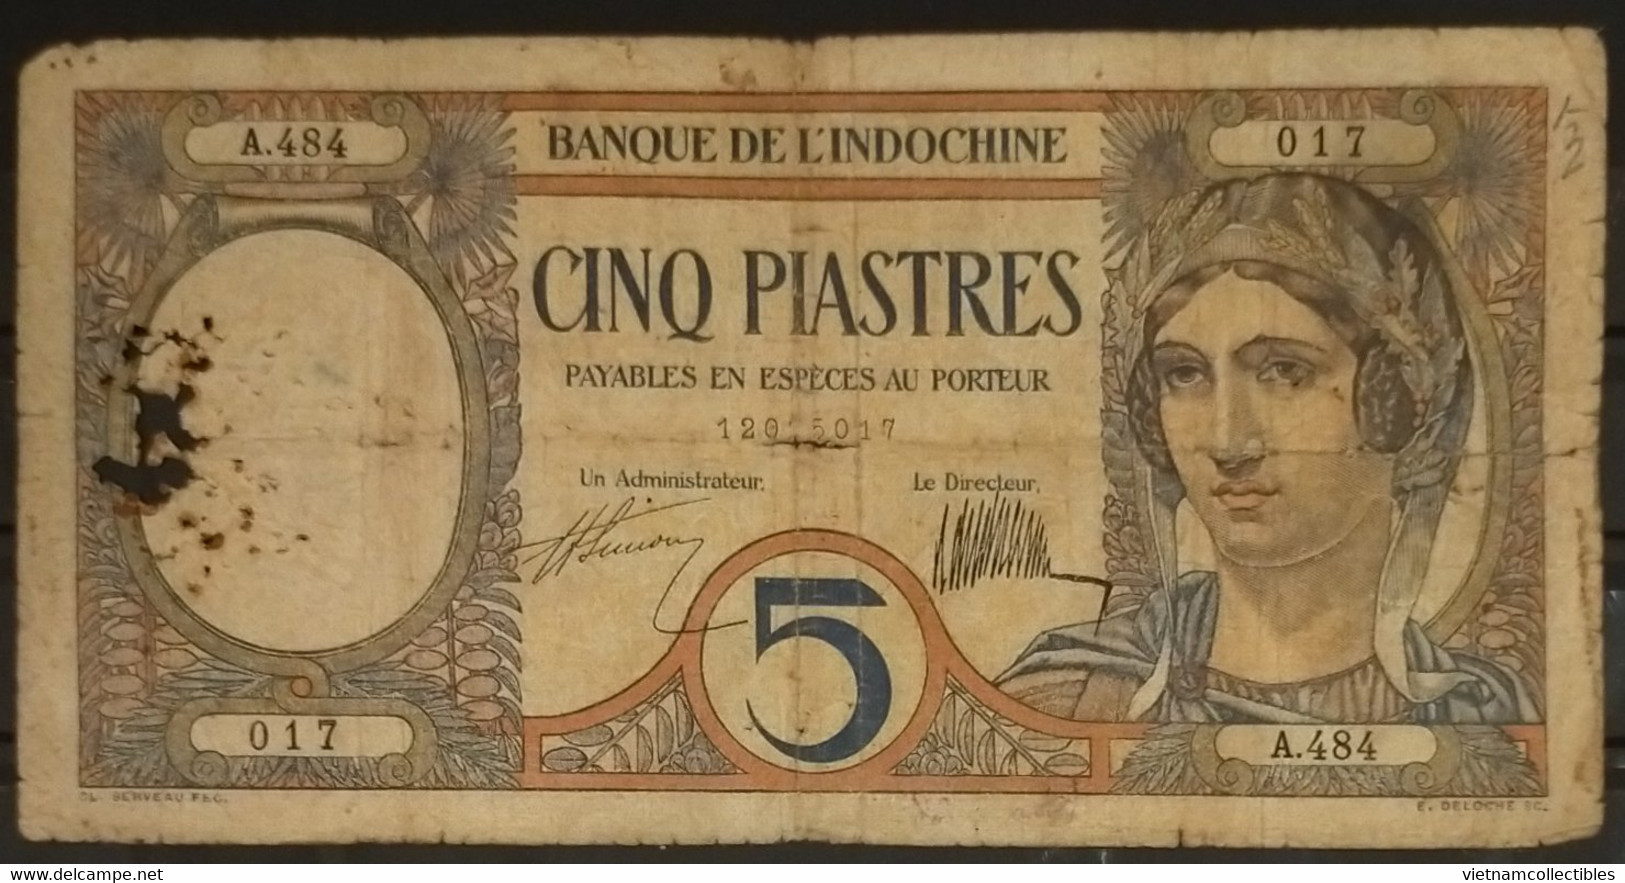 French Indochina Indo China Indochine Laos Vietnam Cambodia 5 Piastres VG Banknote Note 1927-31 - Pick # 49a / 2 Photos - Indocina